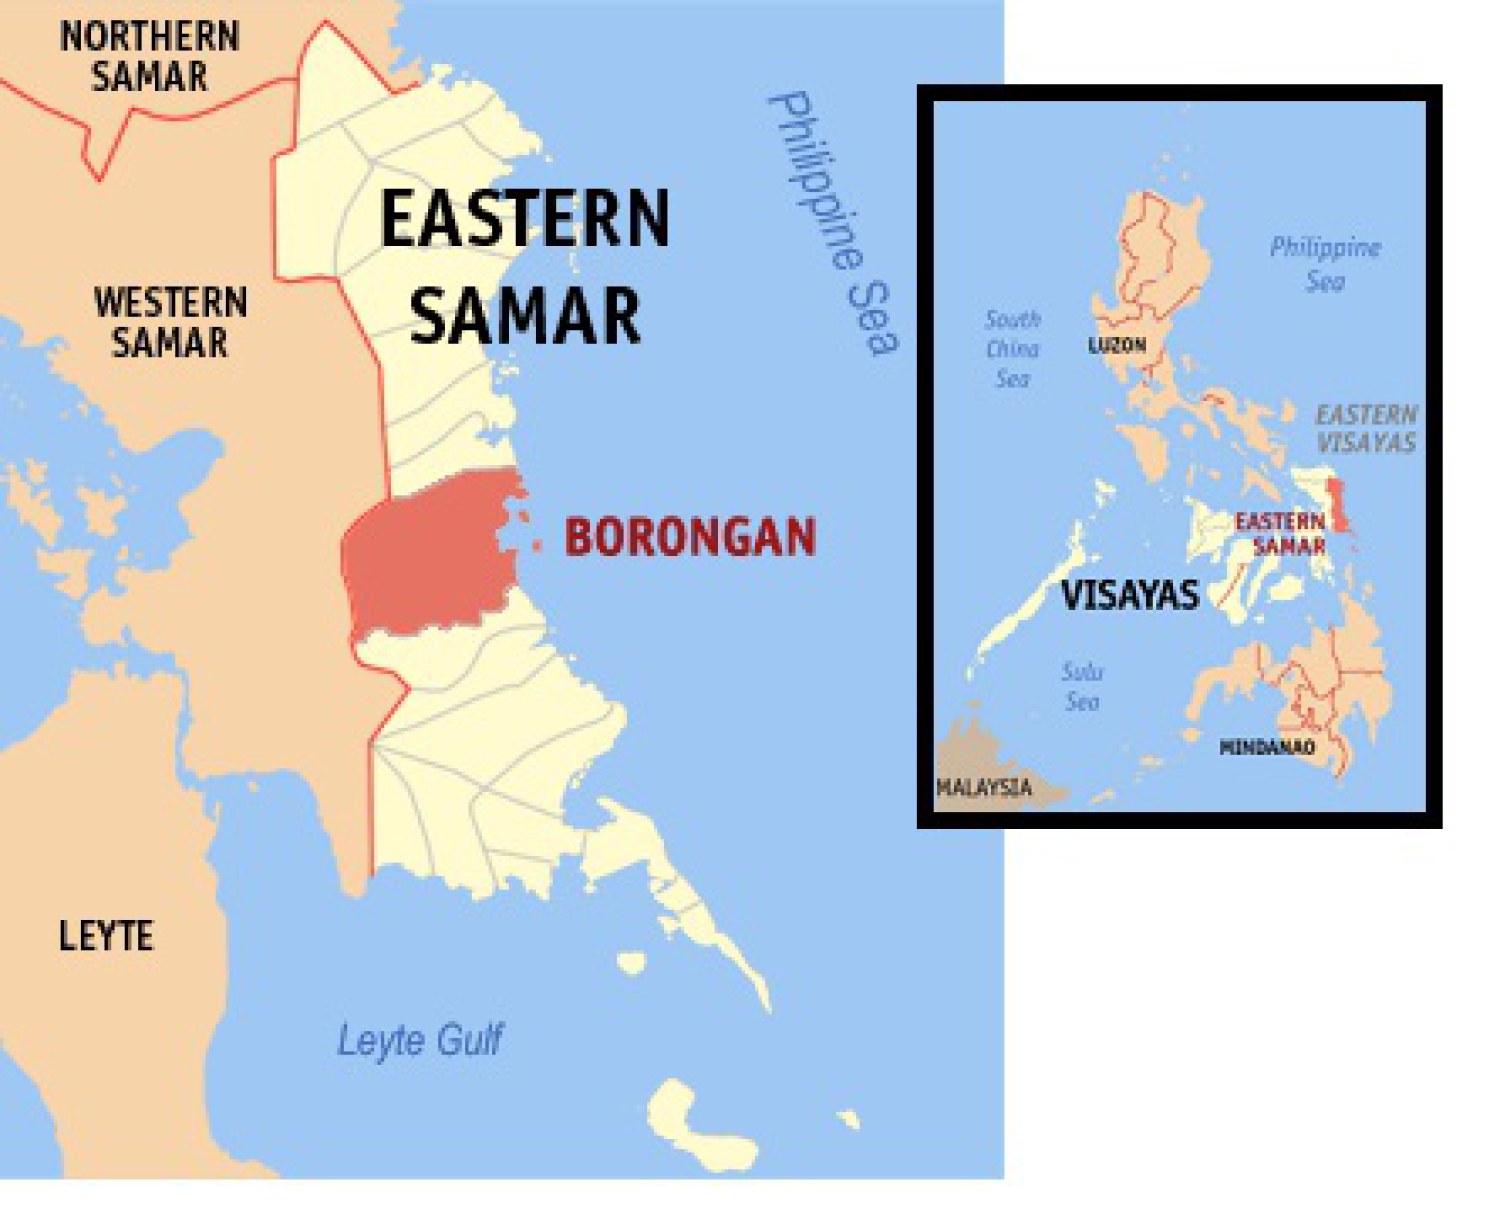 Eastern Samar solon wants probe on re-assignment of gov’t workers